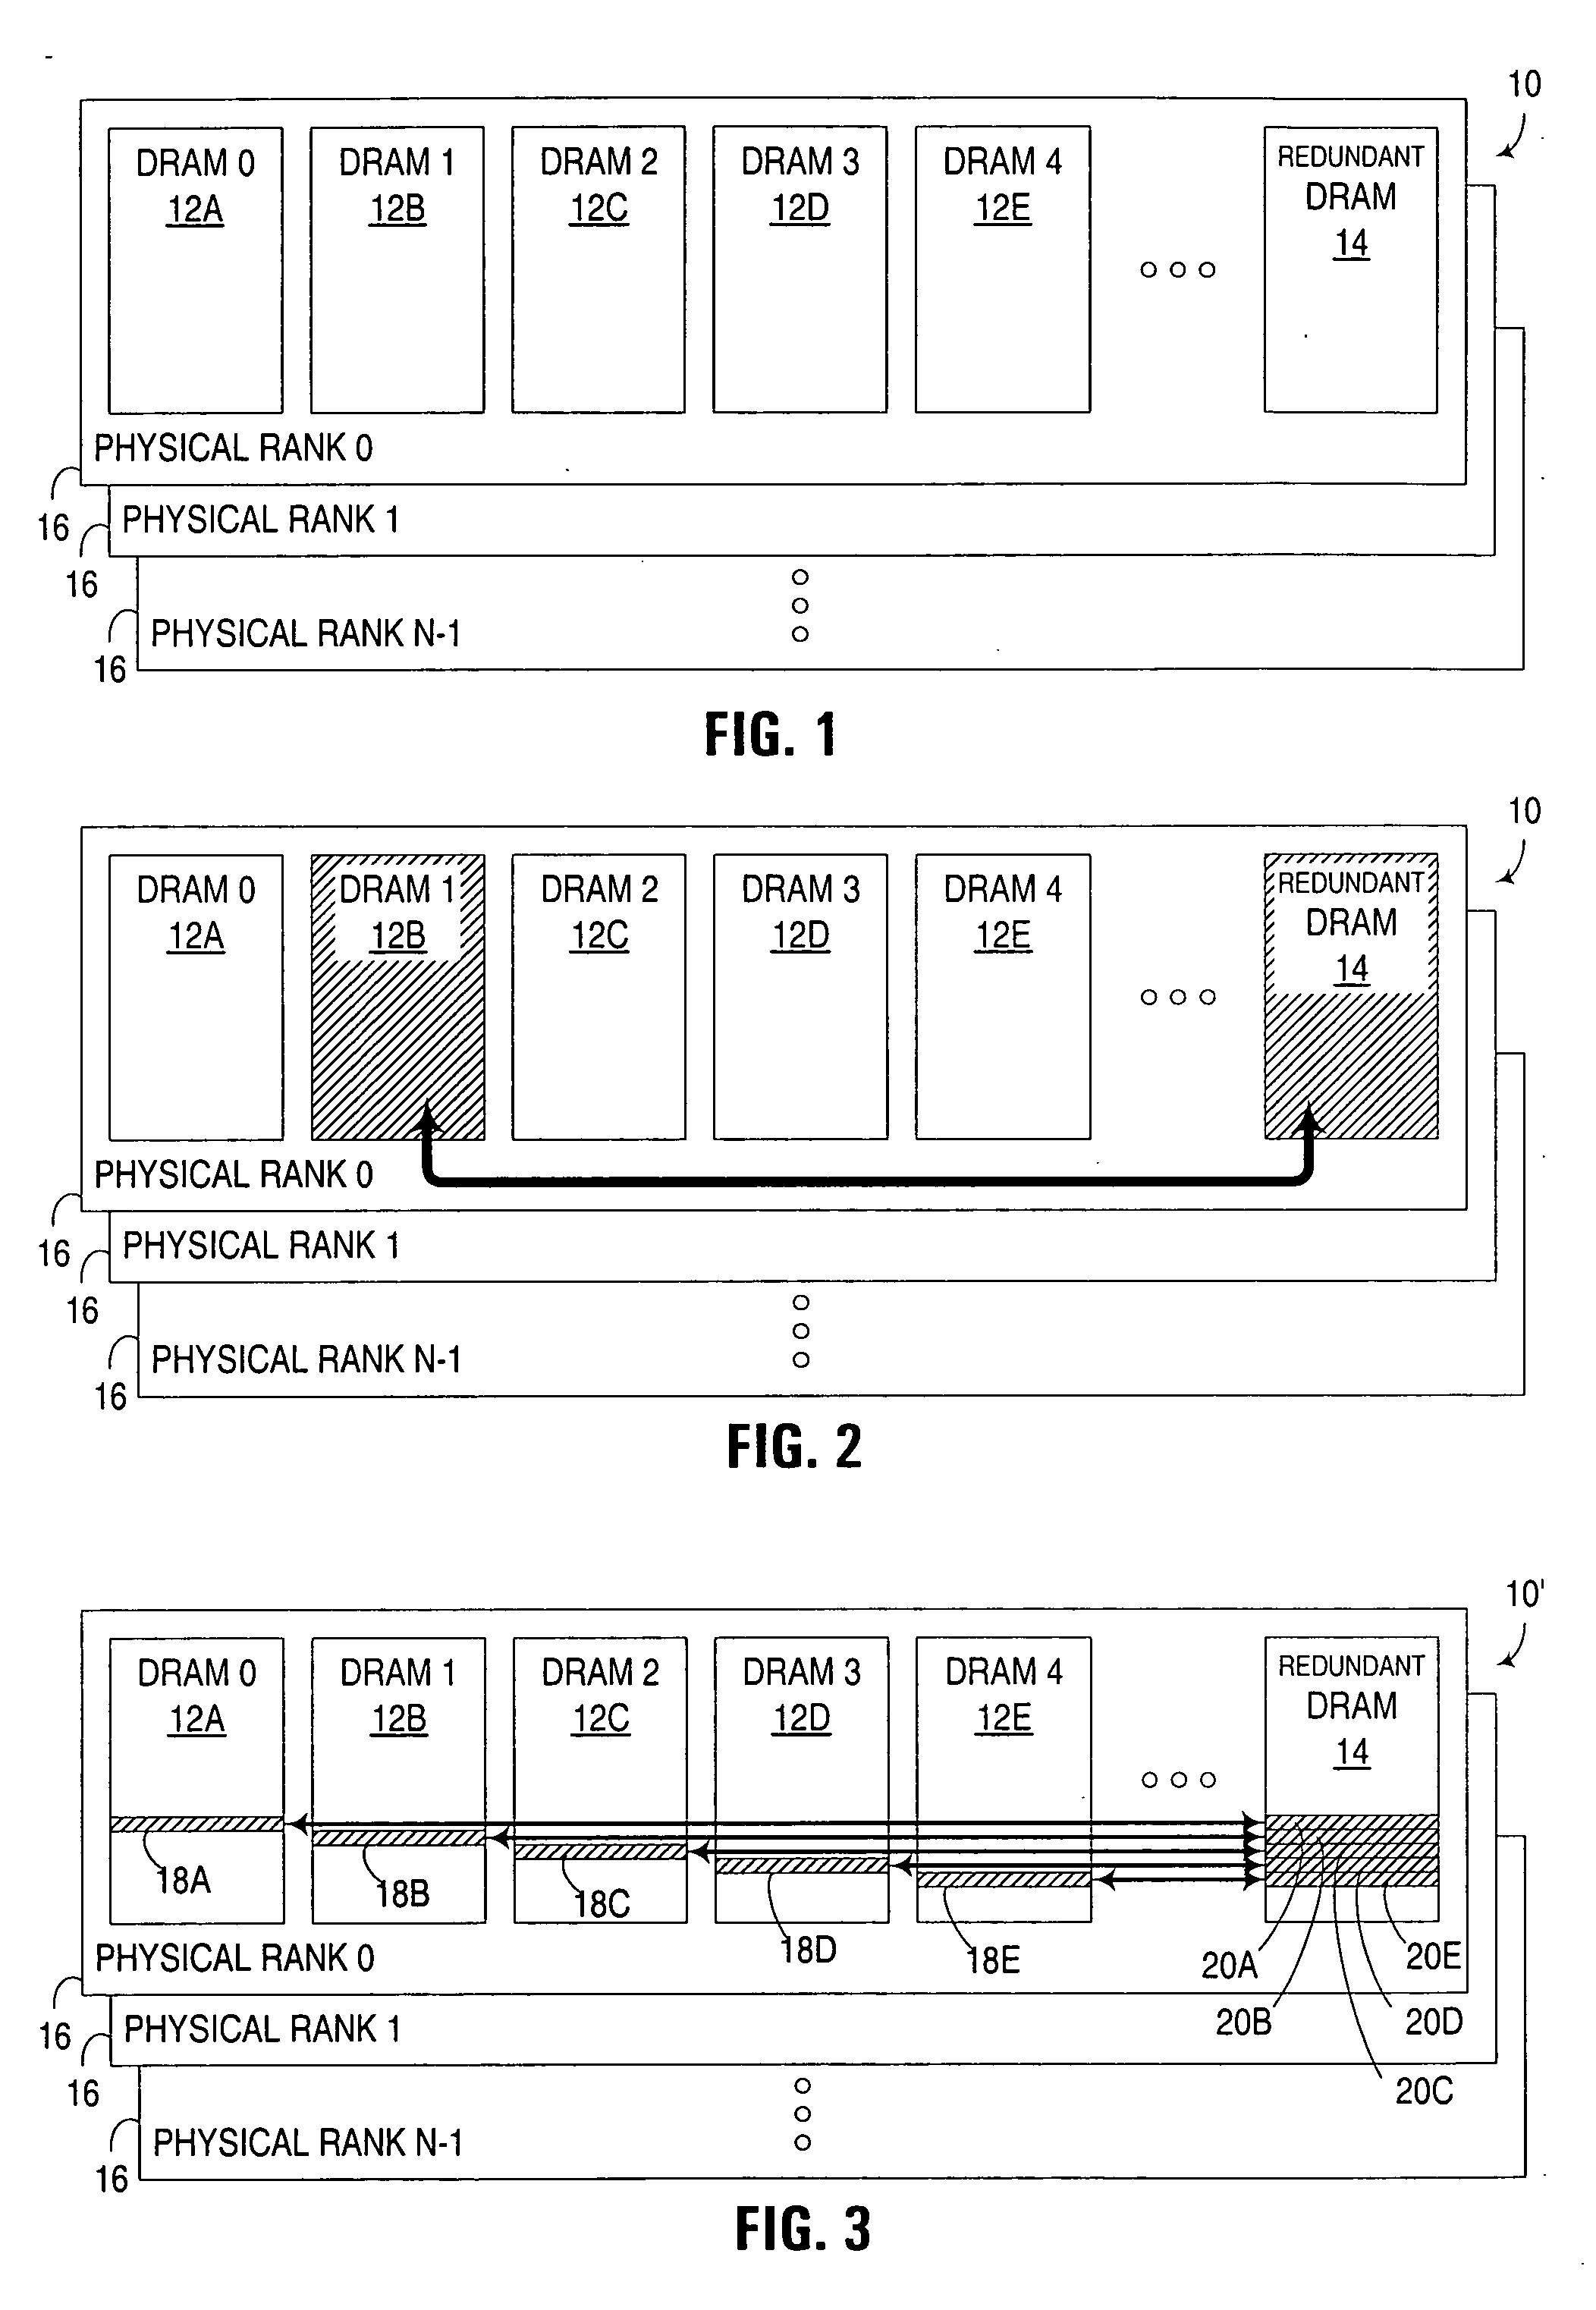 Monitoring of solid state memory devices in active memory system utilizing redundant devices